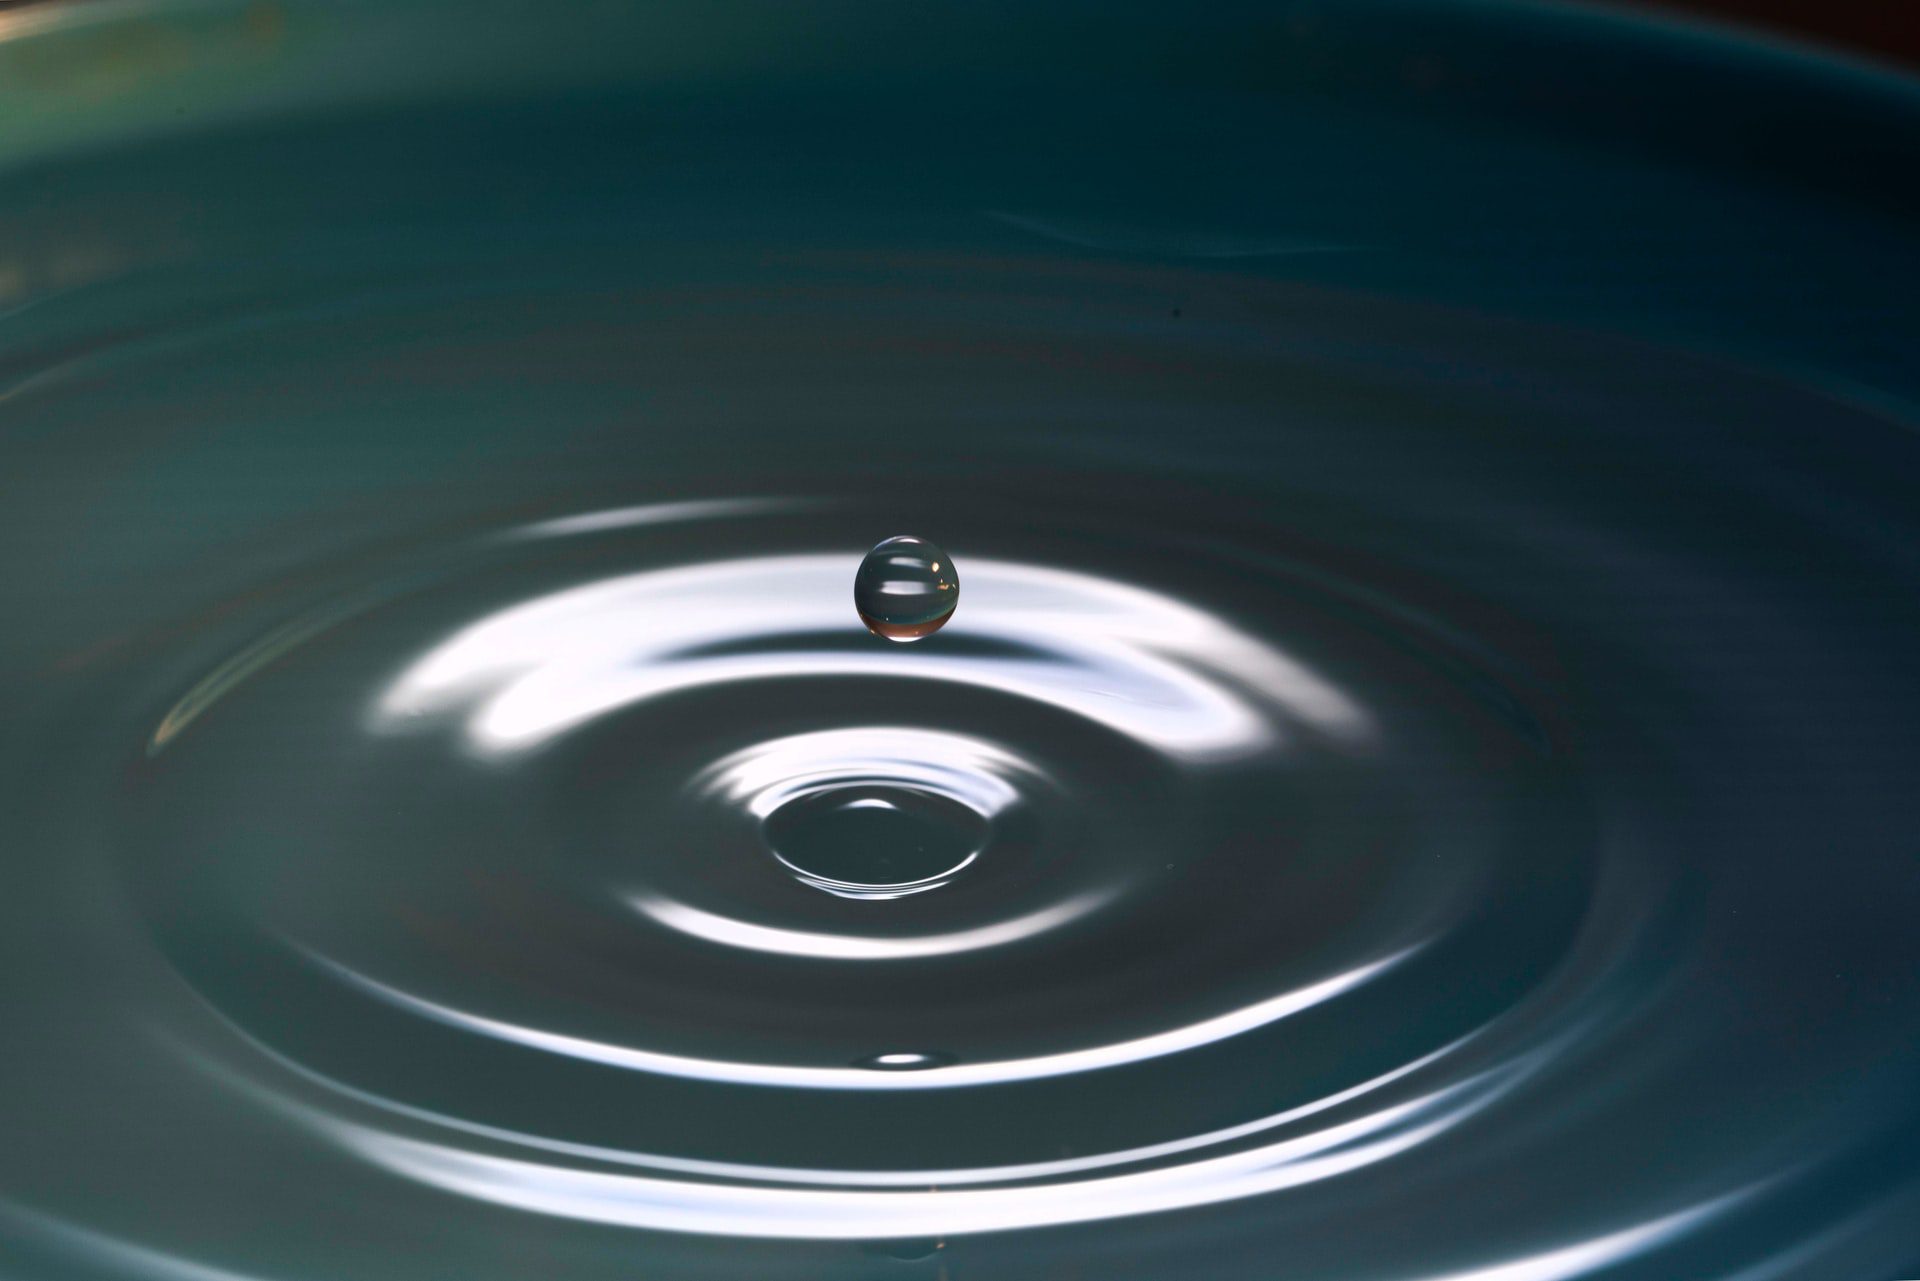 A single water drop causes a ripple in a still pond